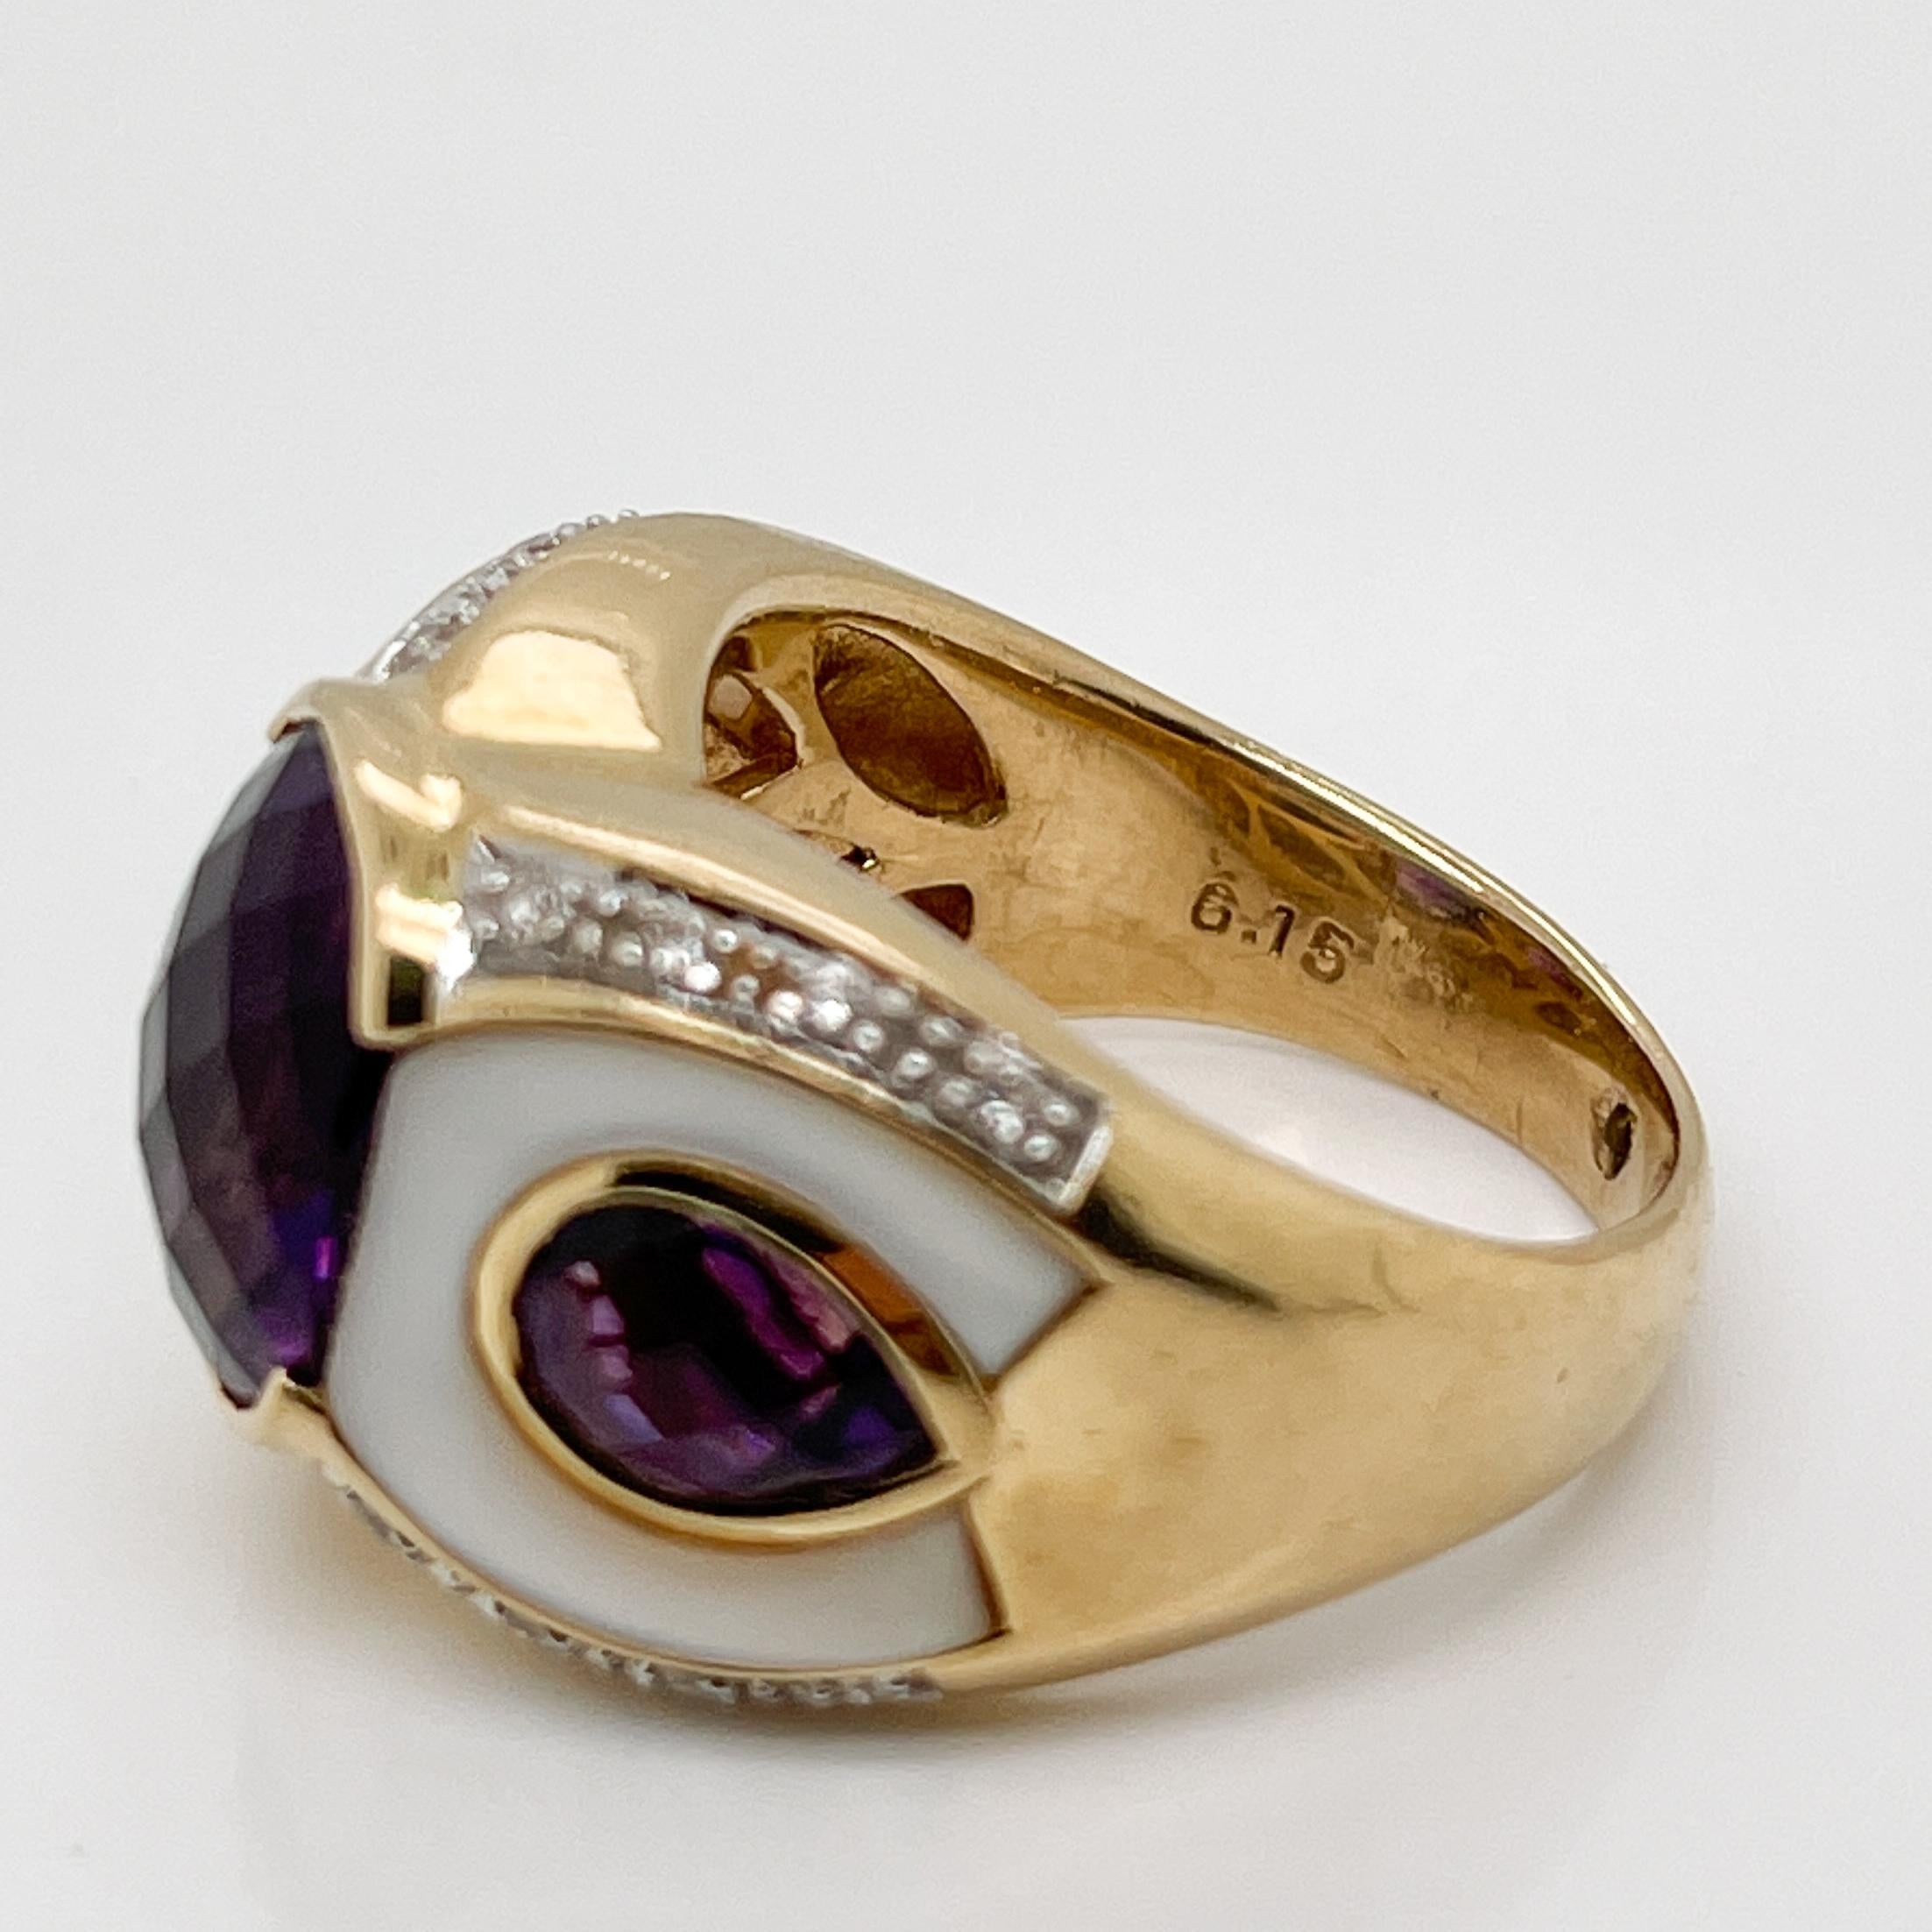 Owl/Parrot Bird Cocktail Ring in 18k Gold, Mother of Pearl, Diamond & Amethyst For Sale 1